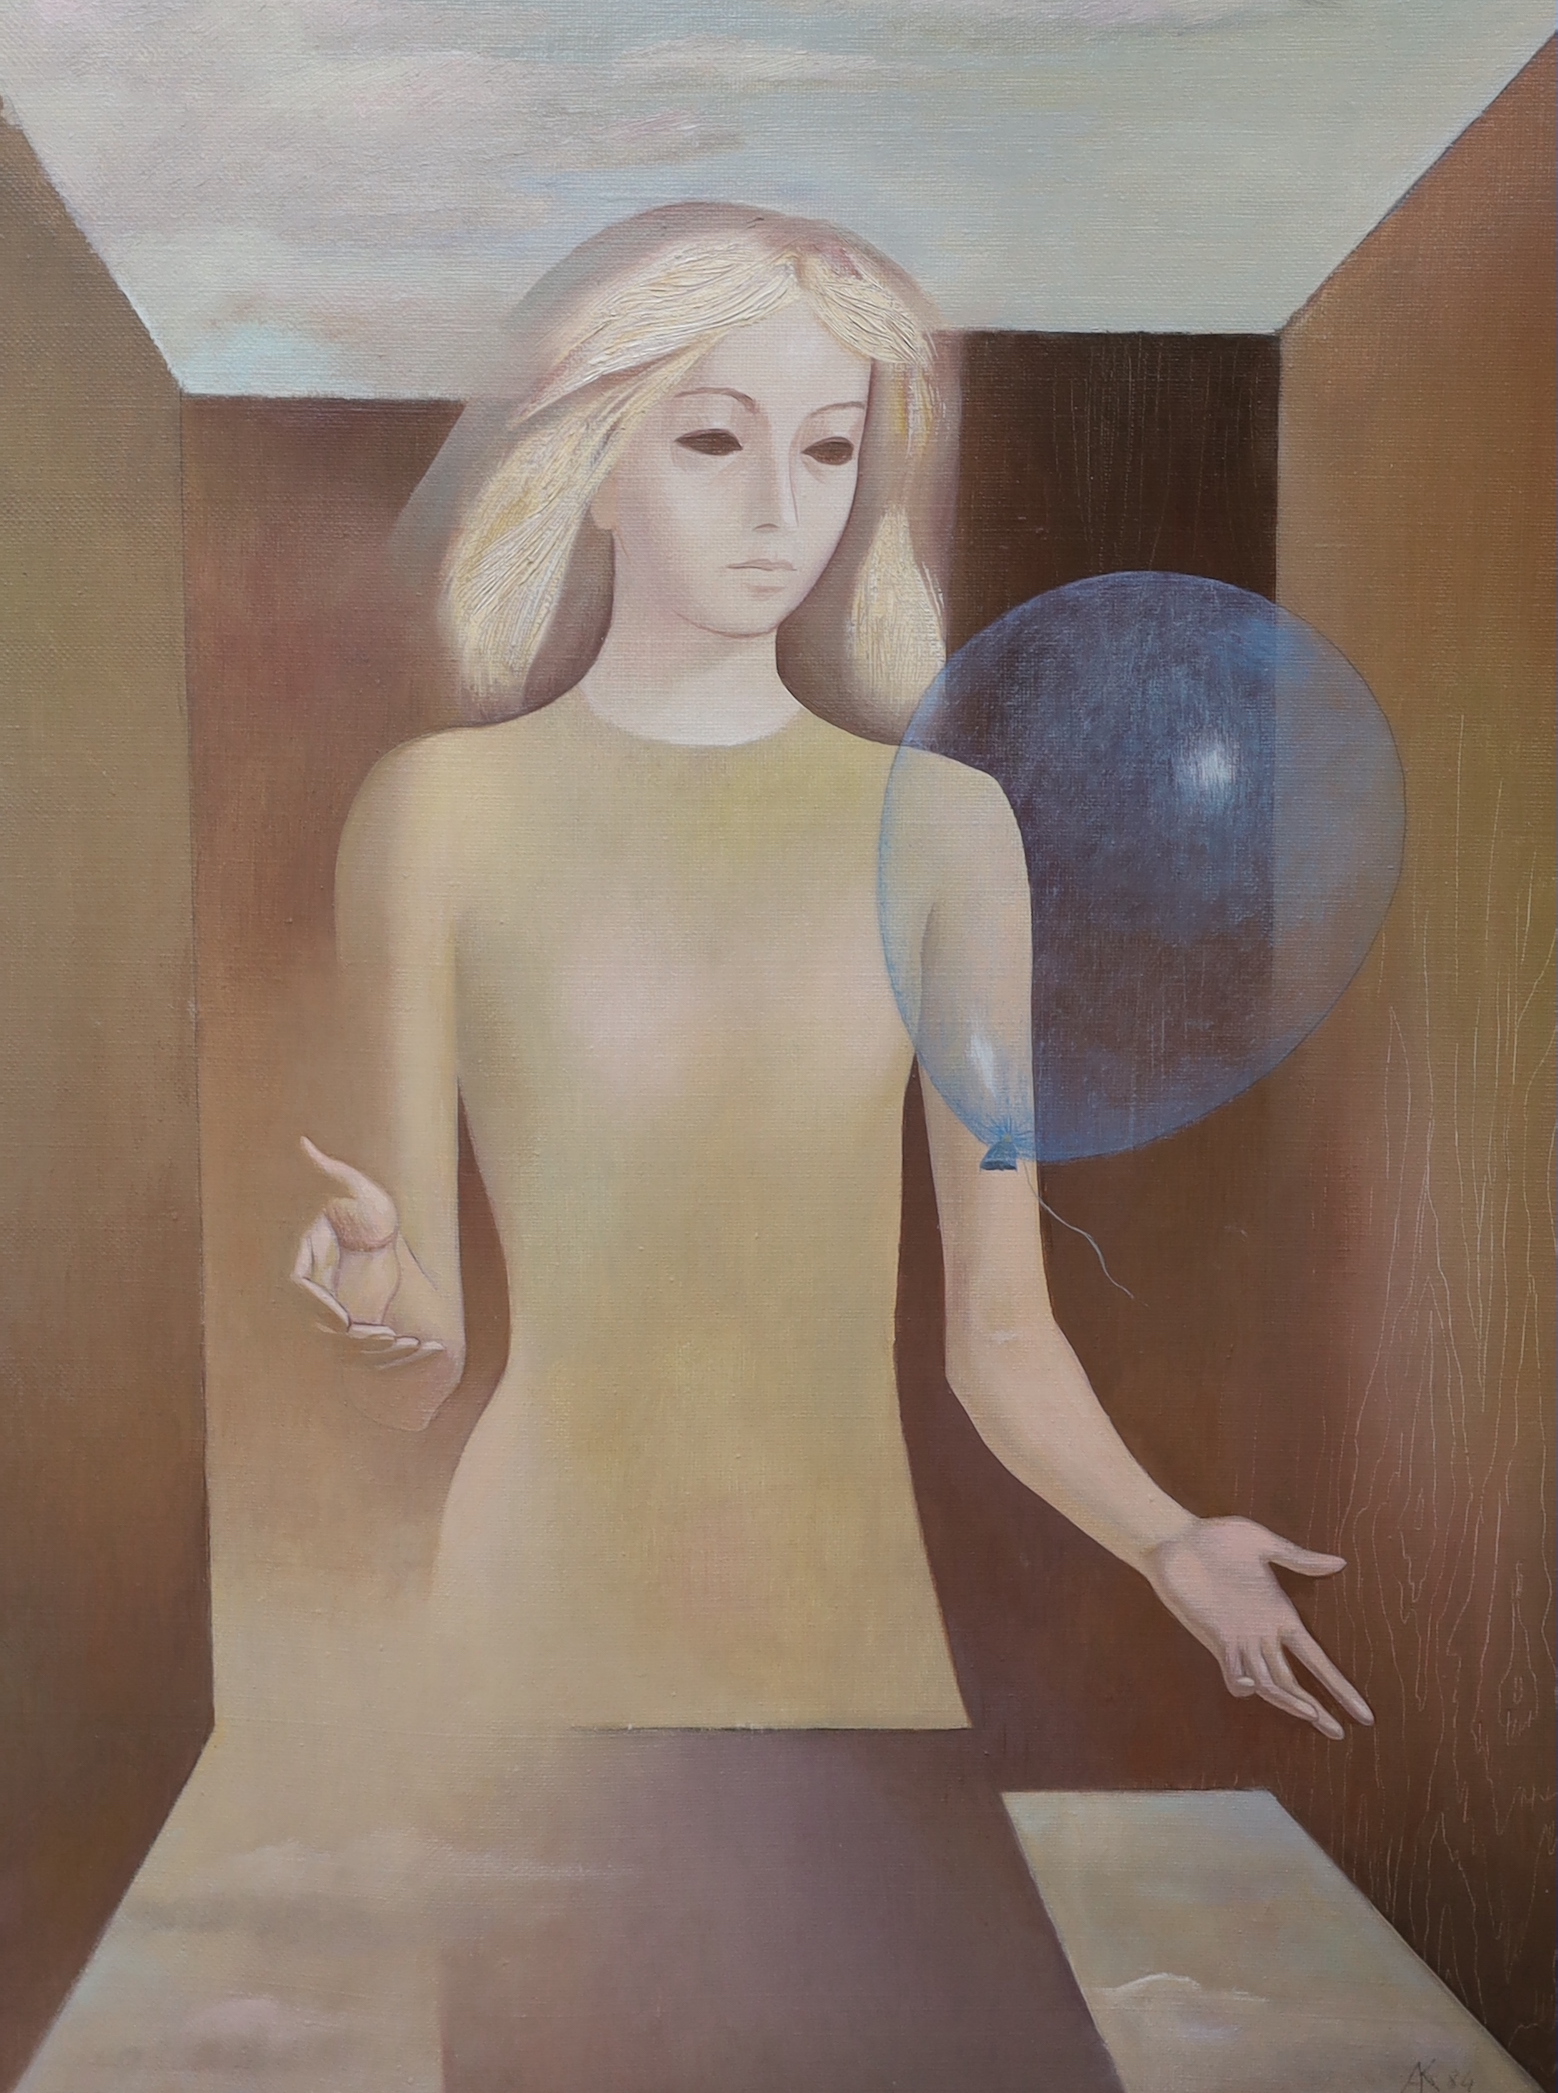 Kapen, oil on canvas, 'Woman with balloon', monogrammed and dated '84, and inscribed verso, 79 x 59cm